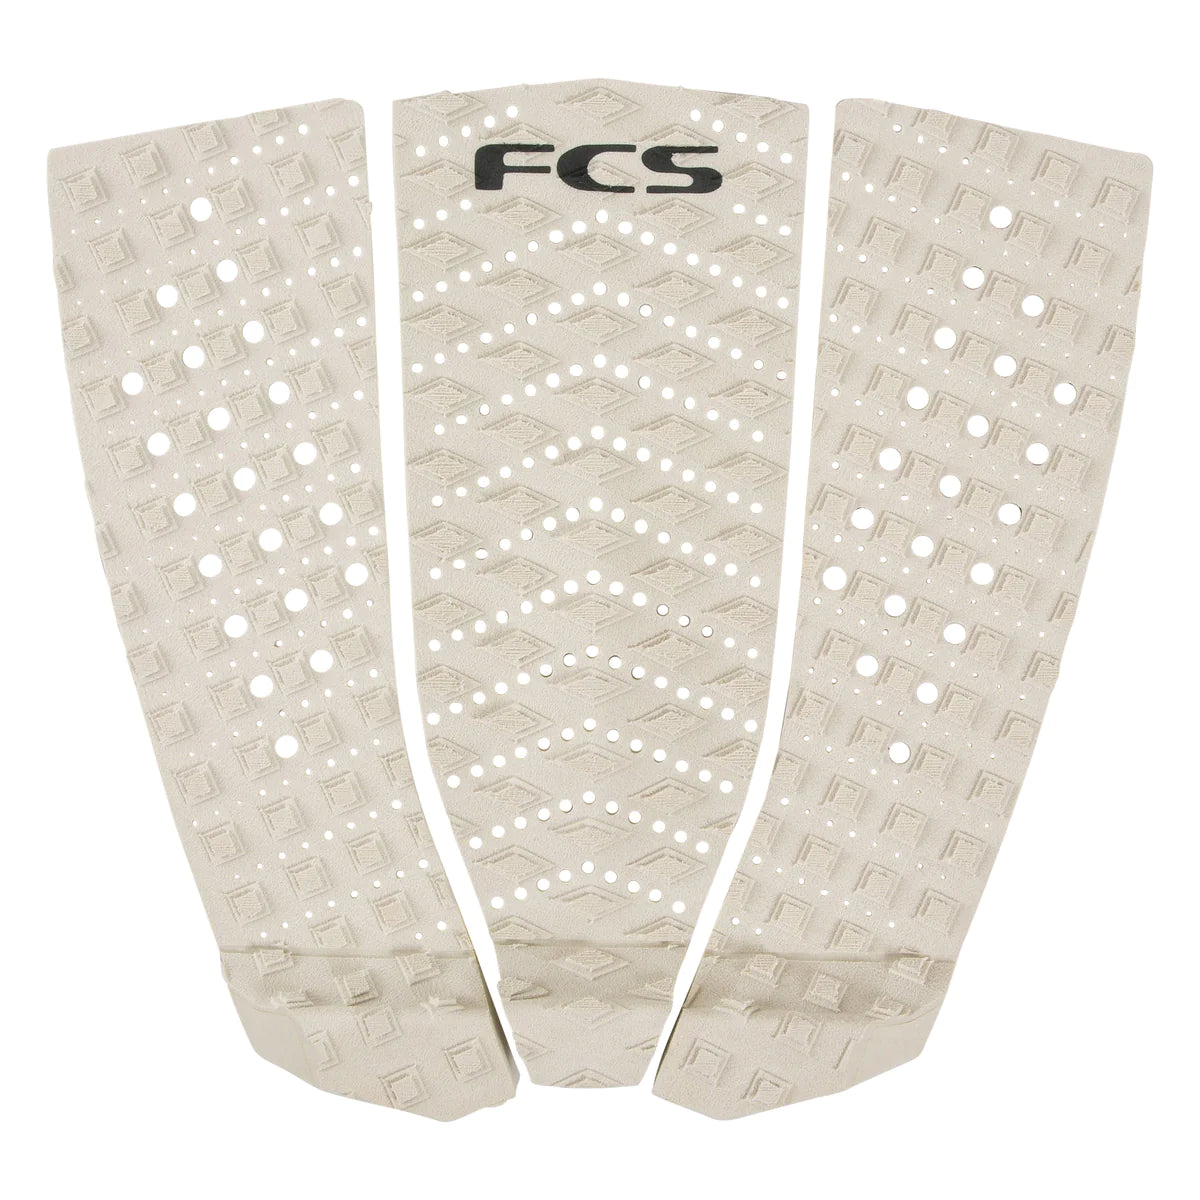 FCS T-3 Traction Grip